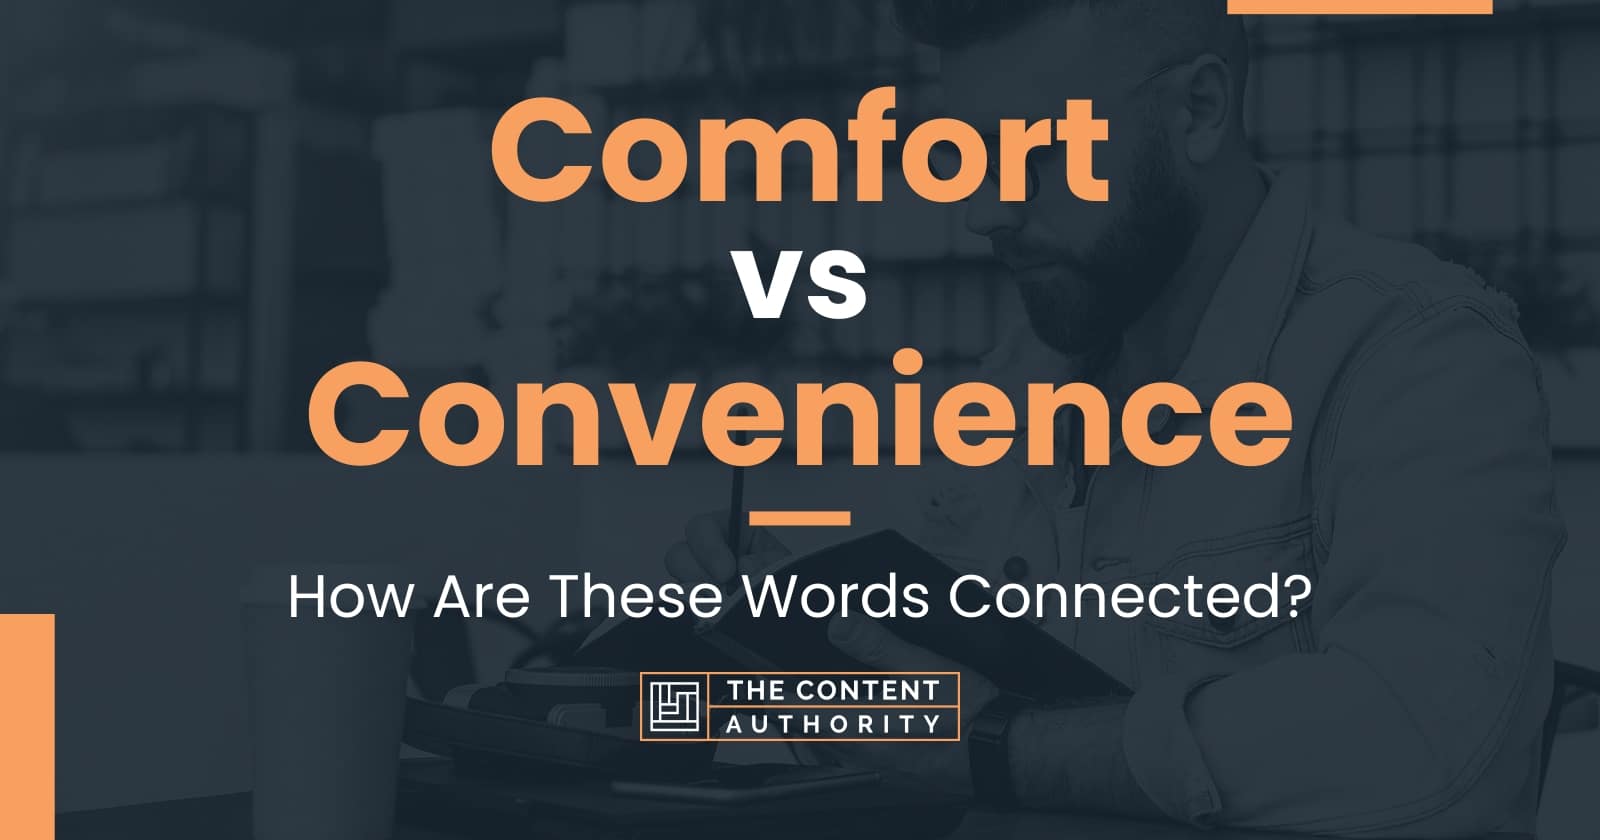 Comfort vs Convenience: How Are These Words Connected?